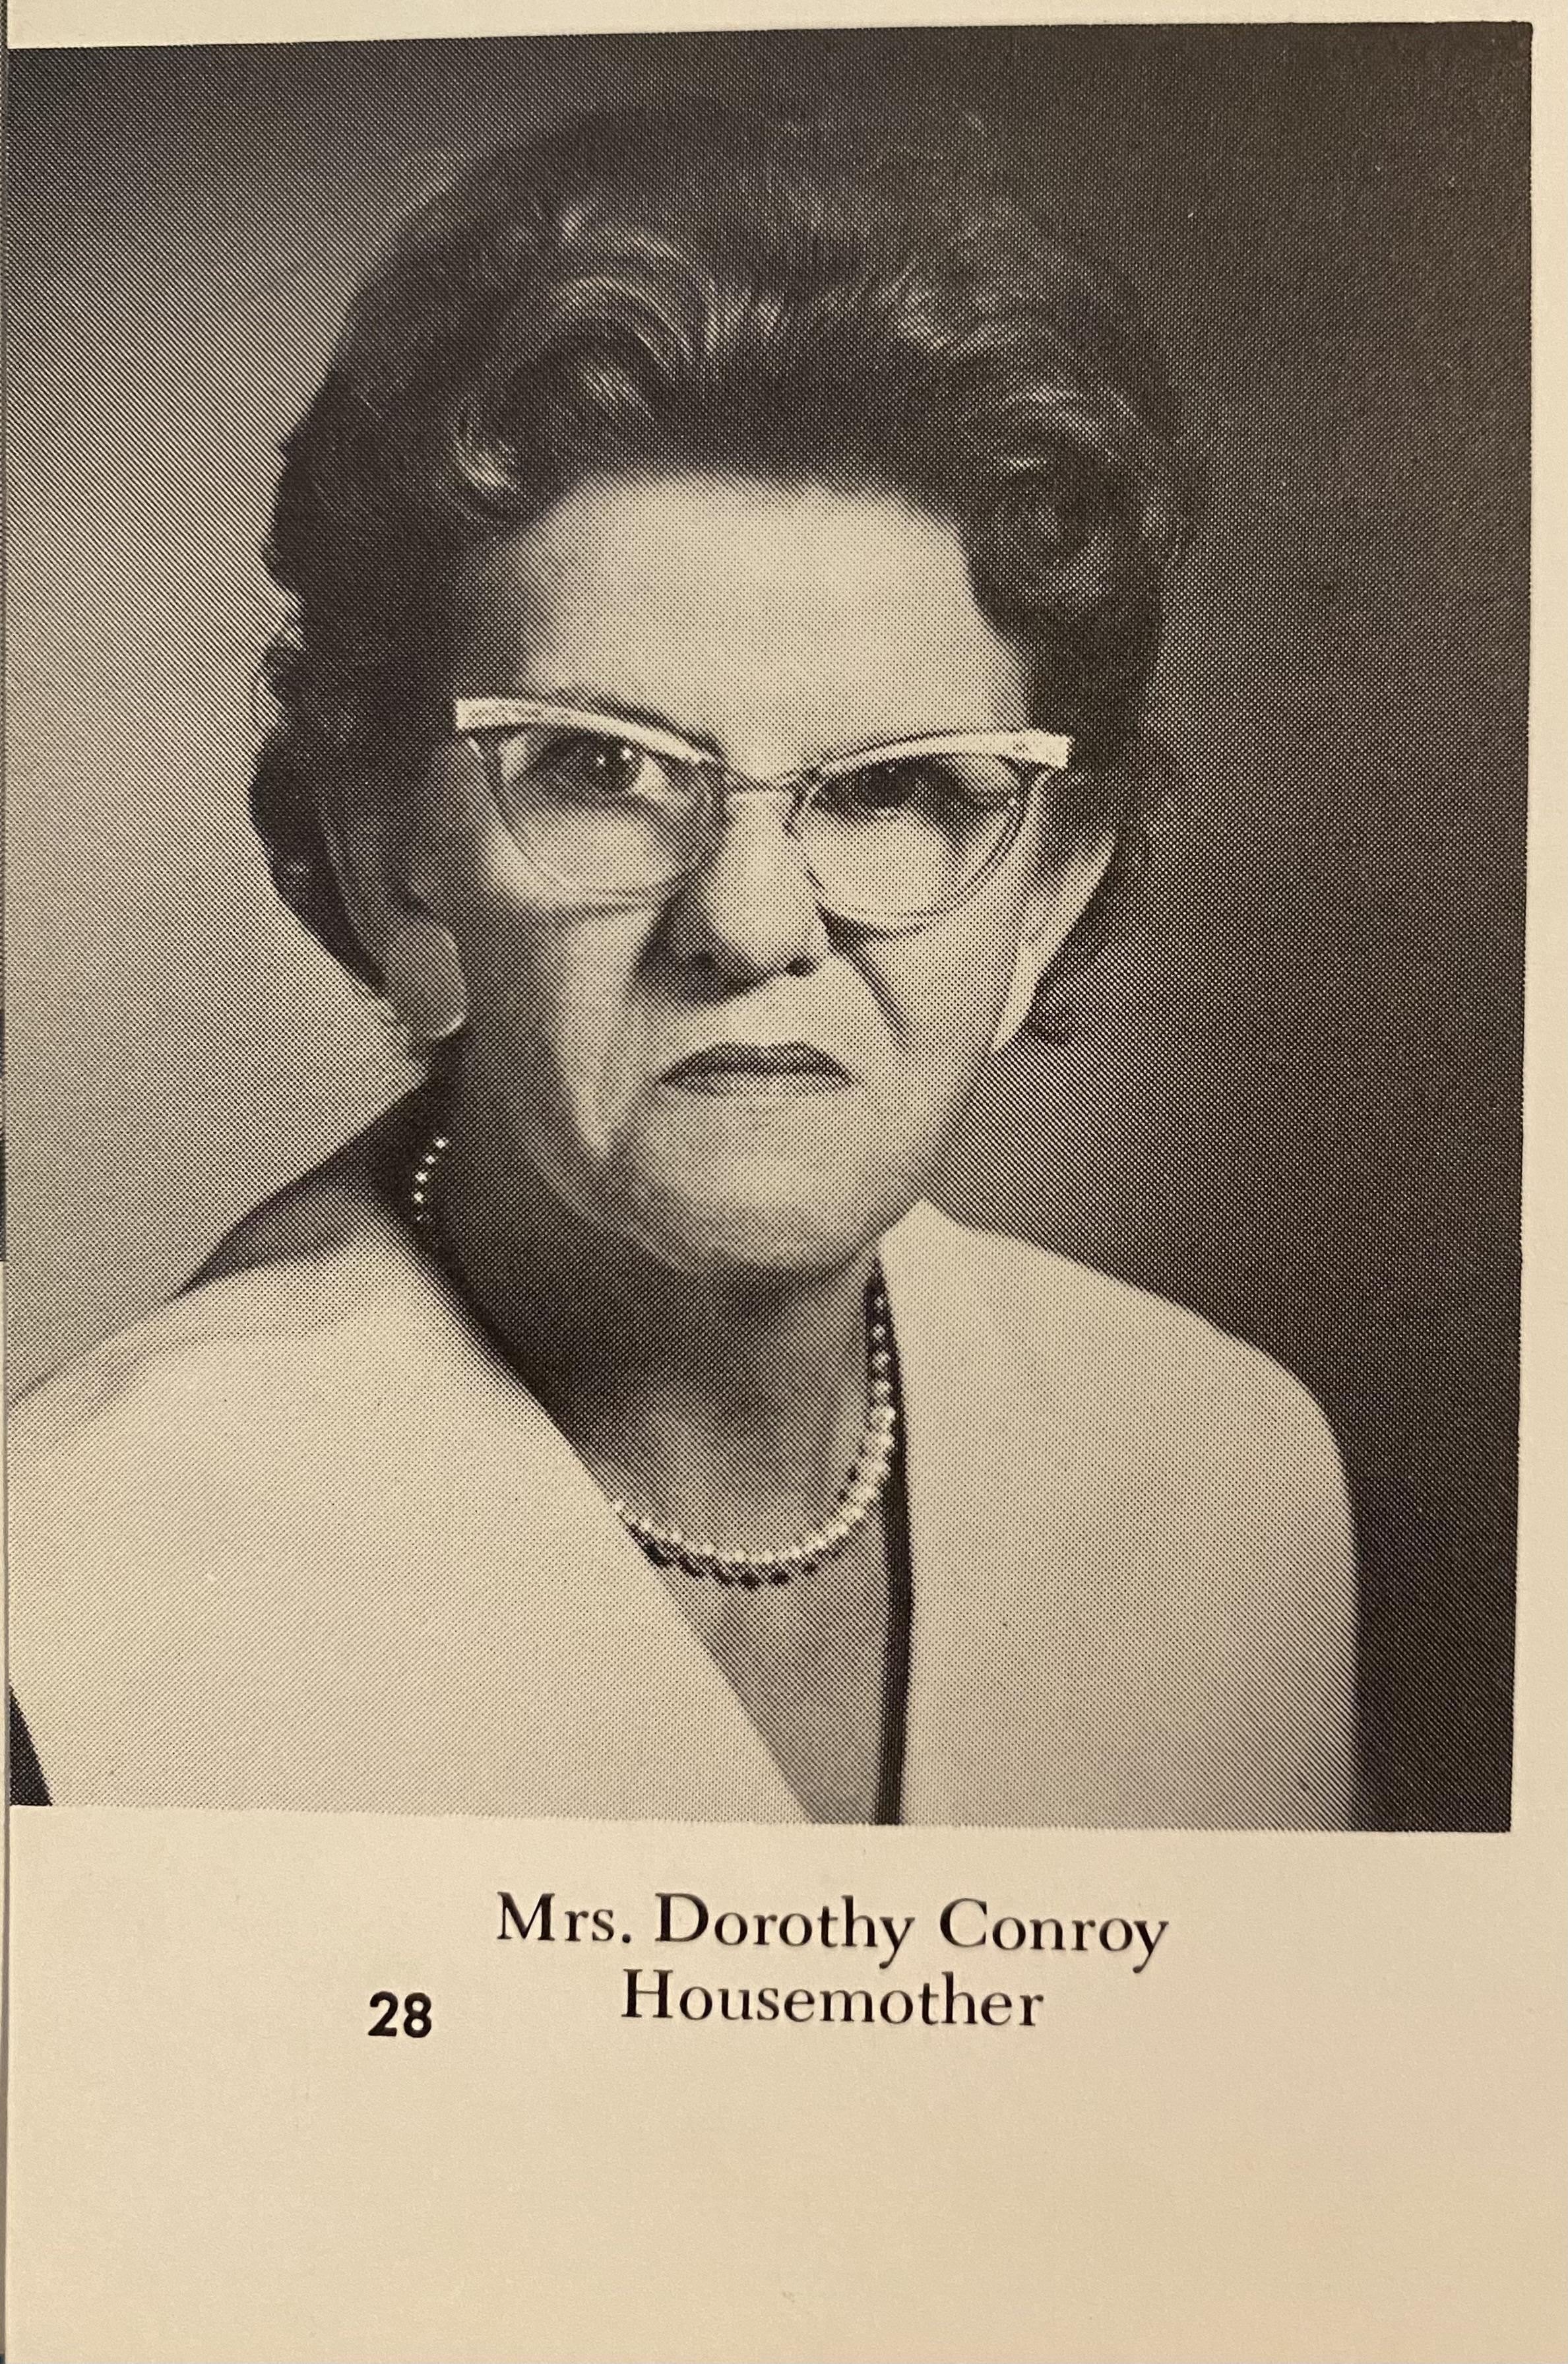 From my mother’s nursing school yearbook - 1968. She said the nursing dorm had several housemothers that would make sure boys didn’t visit the dorm and girls didn’t stay out past an early curfew.jpg